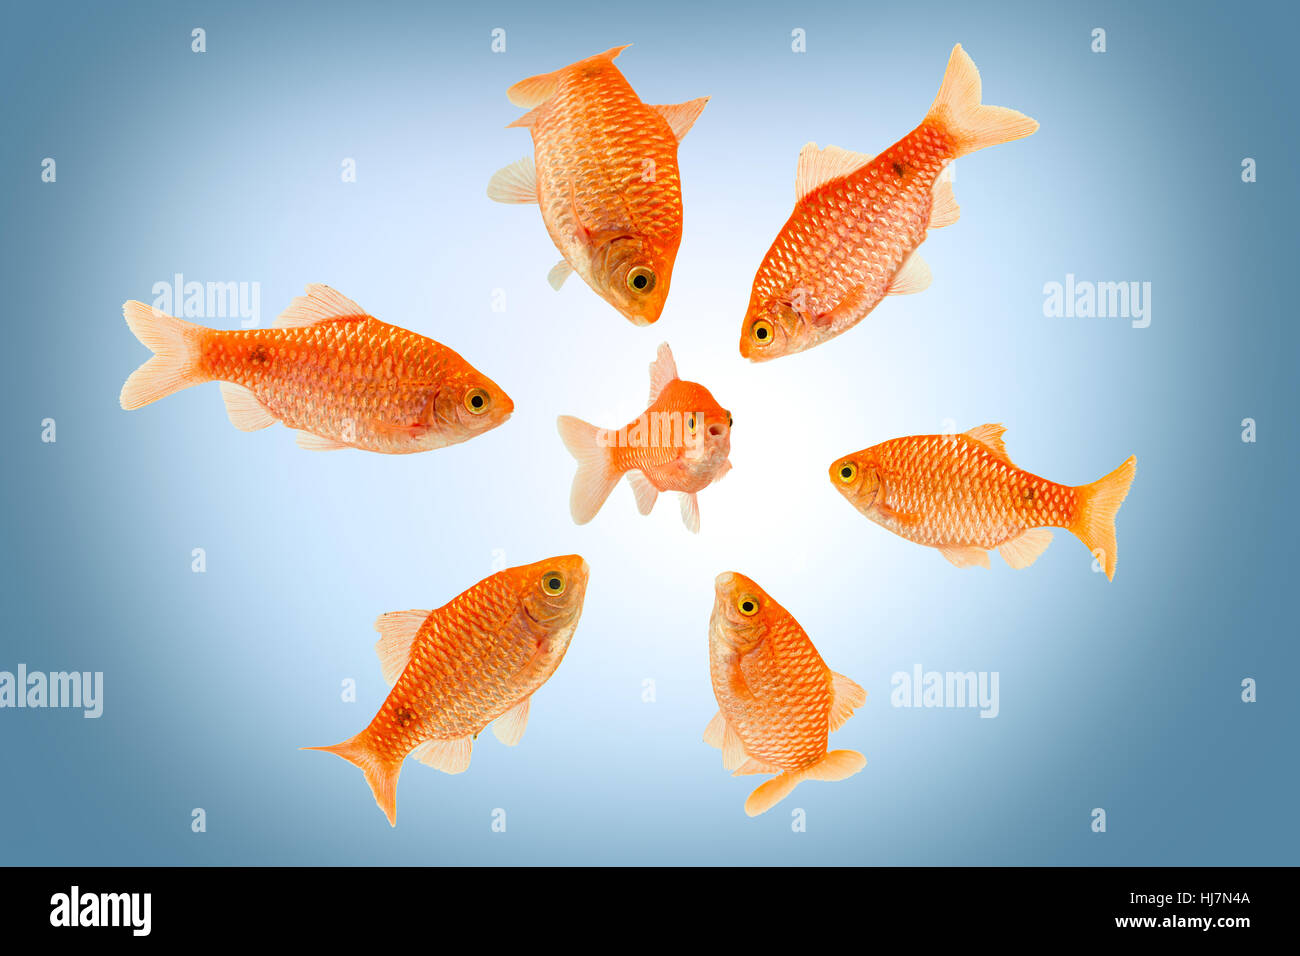 conflict, fish, mobbing, pisces, against, differently, quarrel, conflict, lone Stock Photo